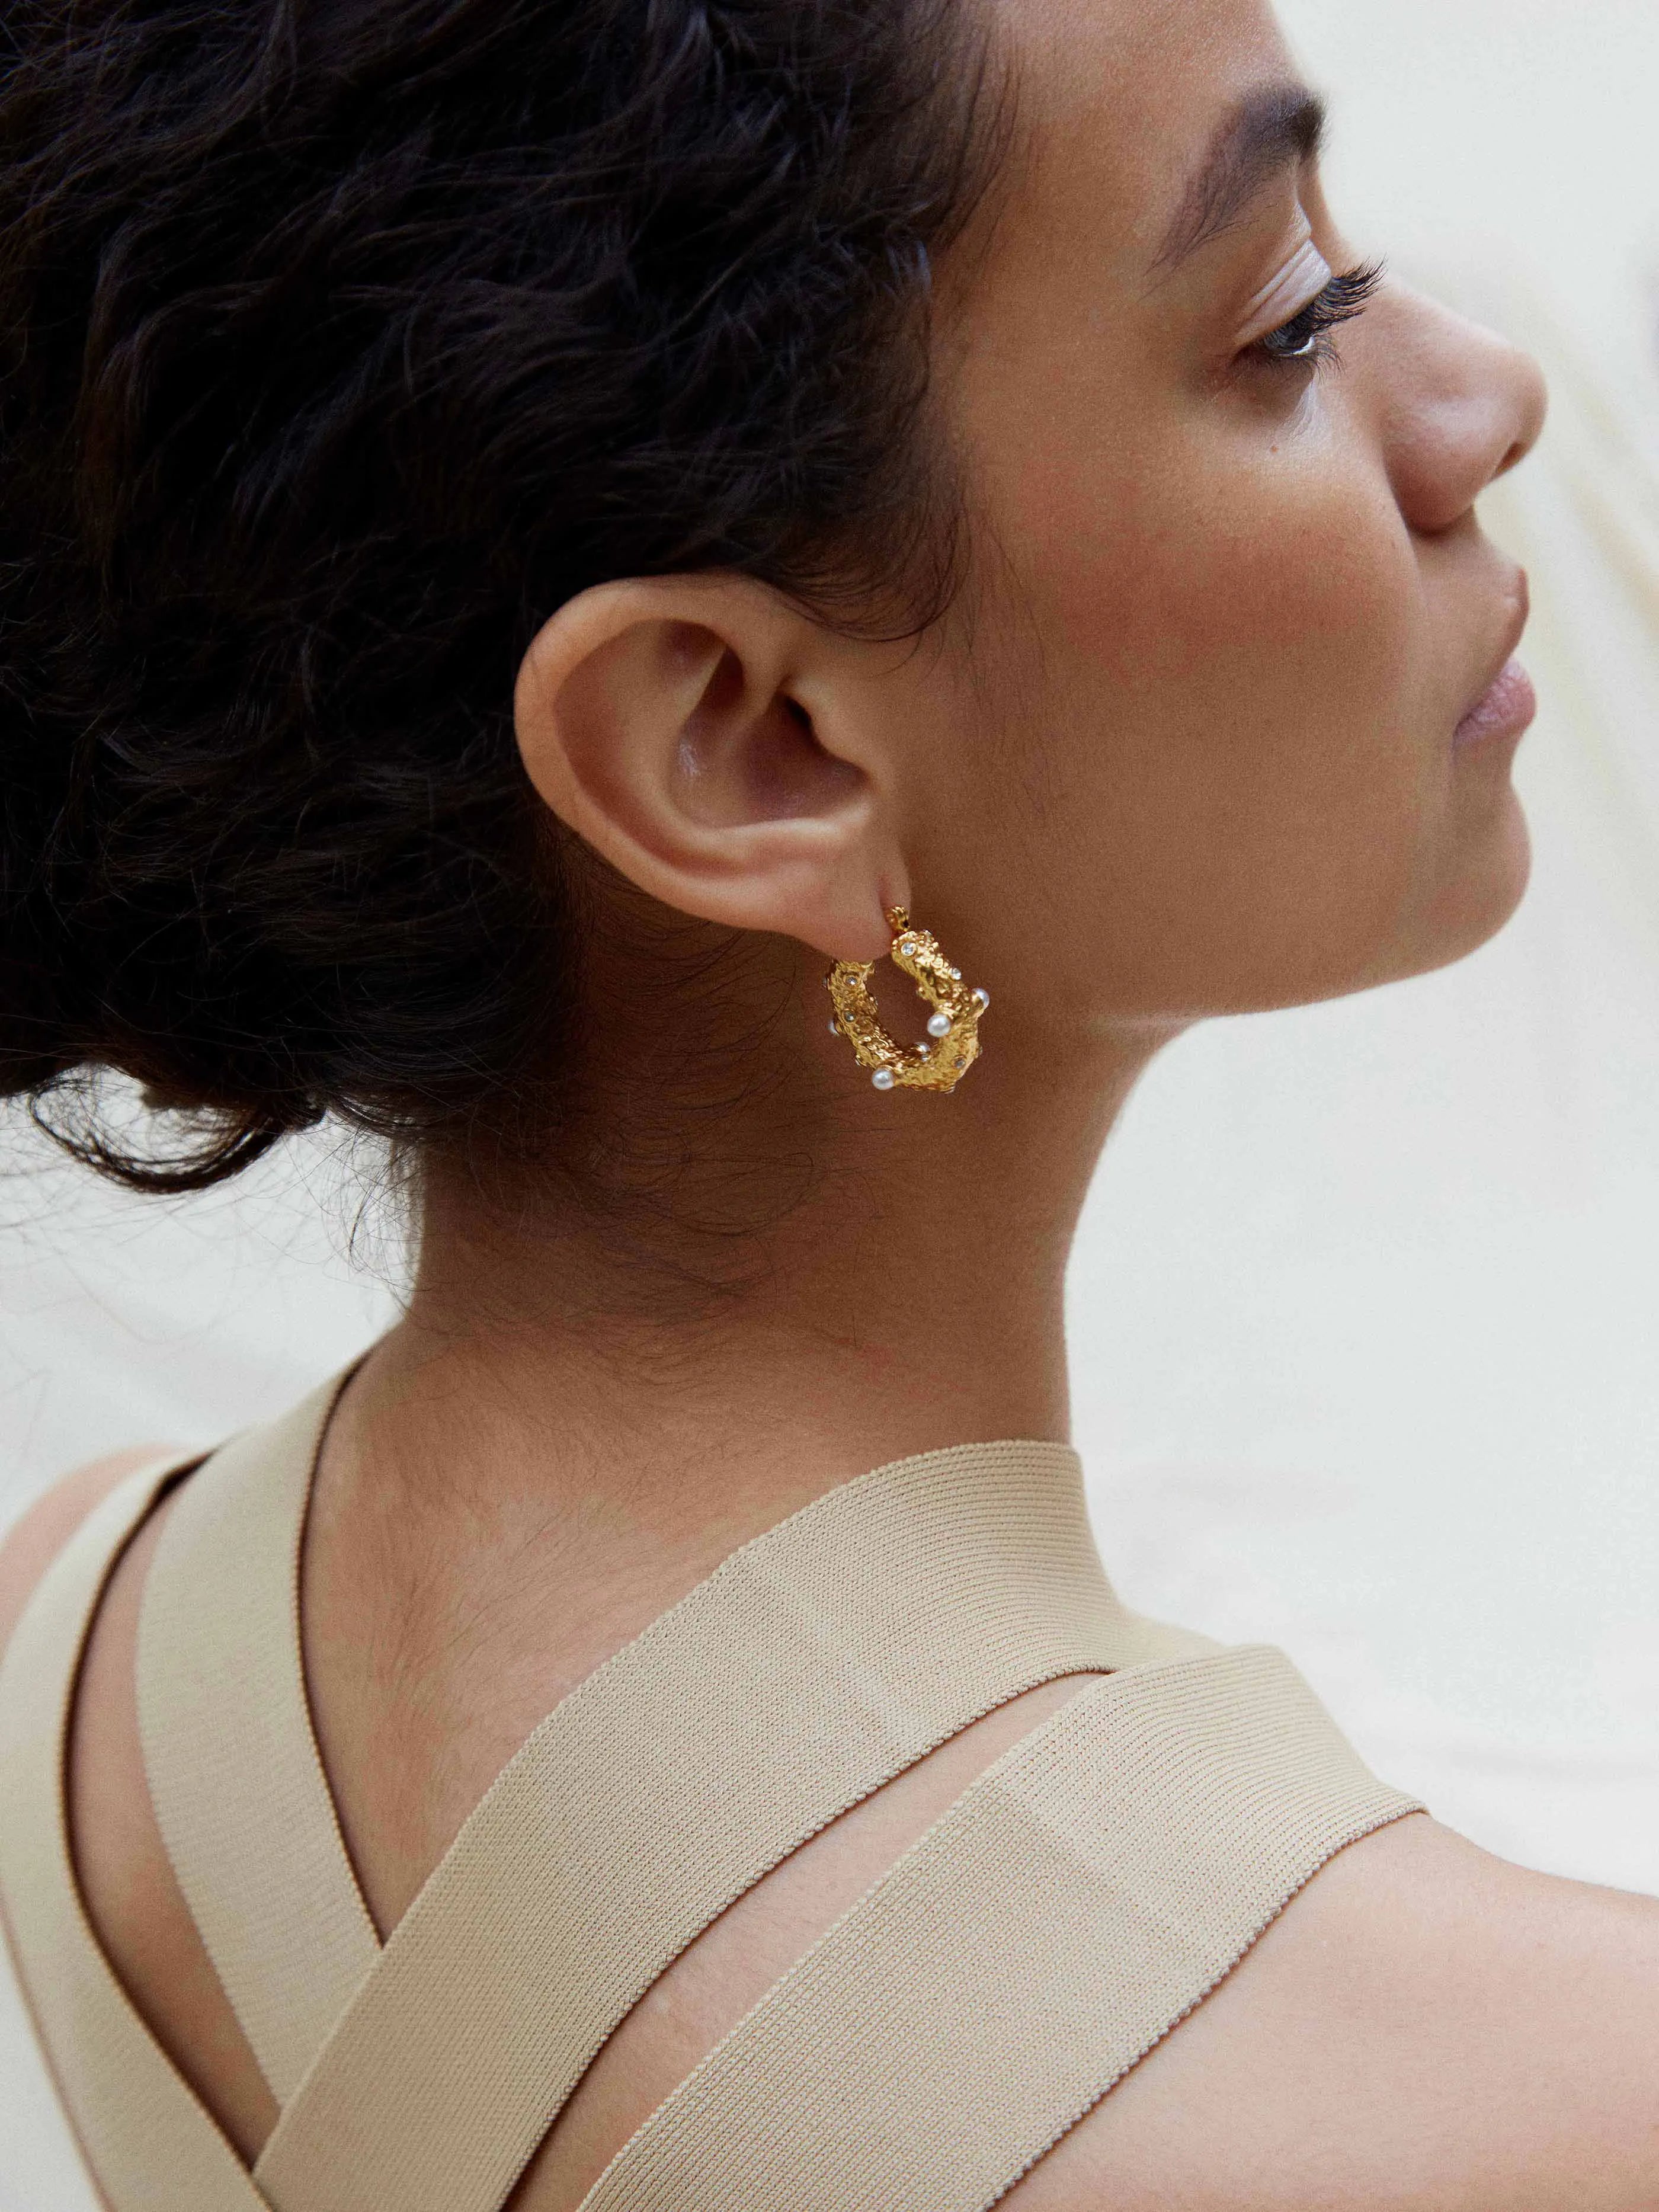 A woman wearing a tan top and SHYLA - Sirius Hoops- Gold earrings.